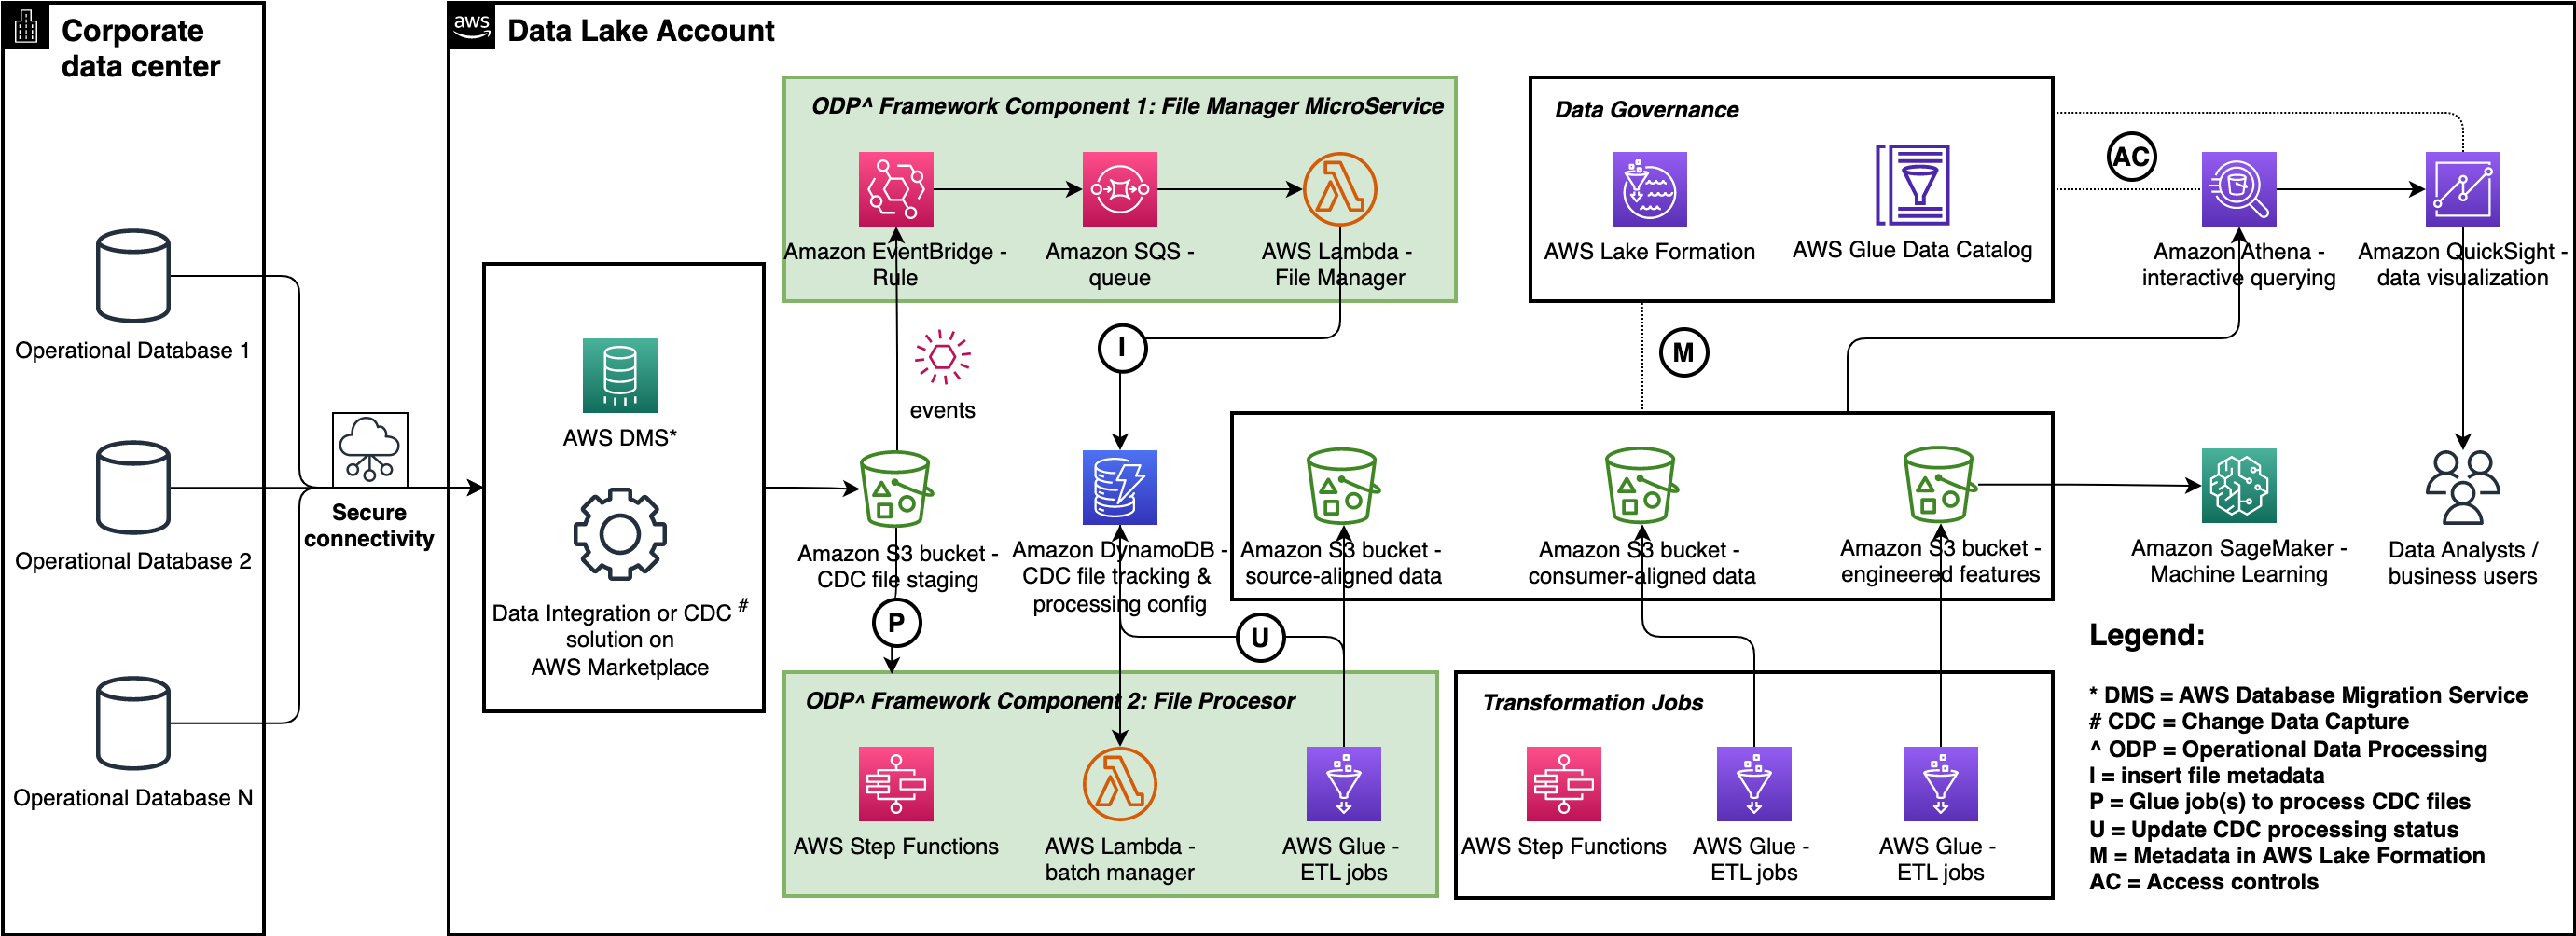 Simplify operational data processing in data lakes using AWS Glue and Apache Hudi | Amazon Web Services